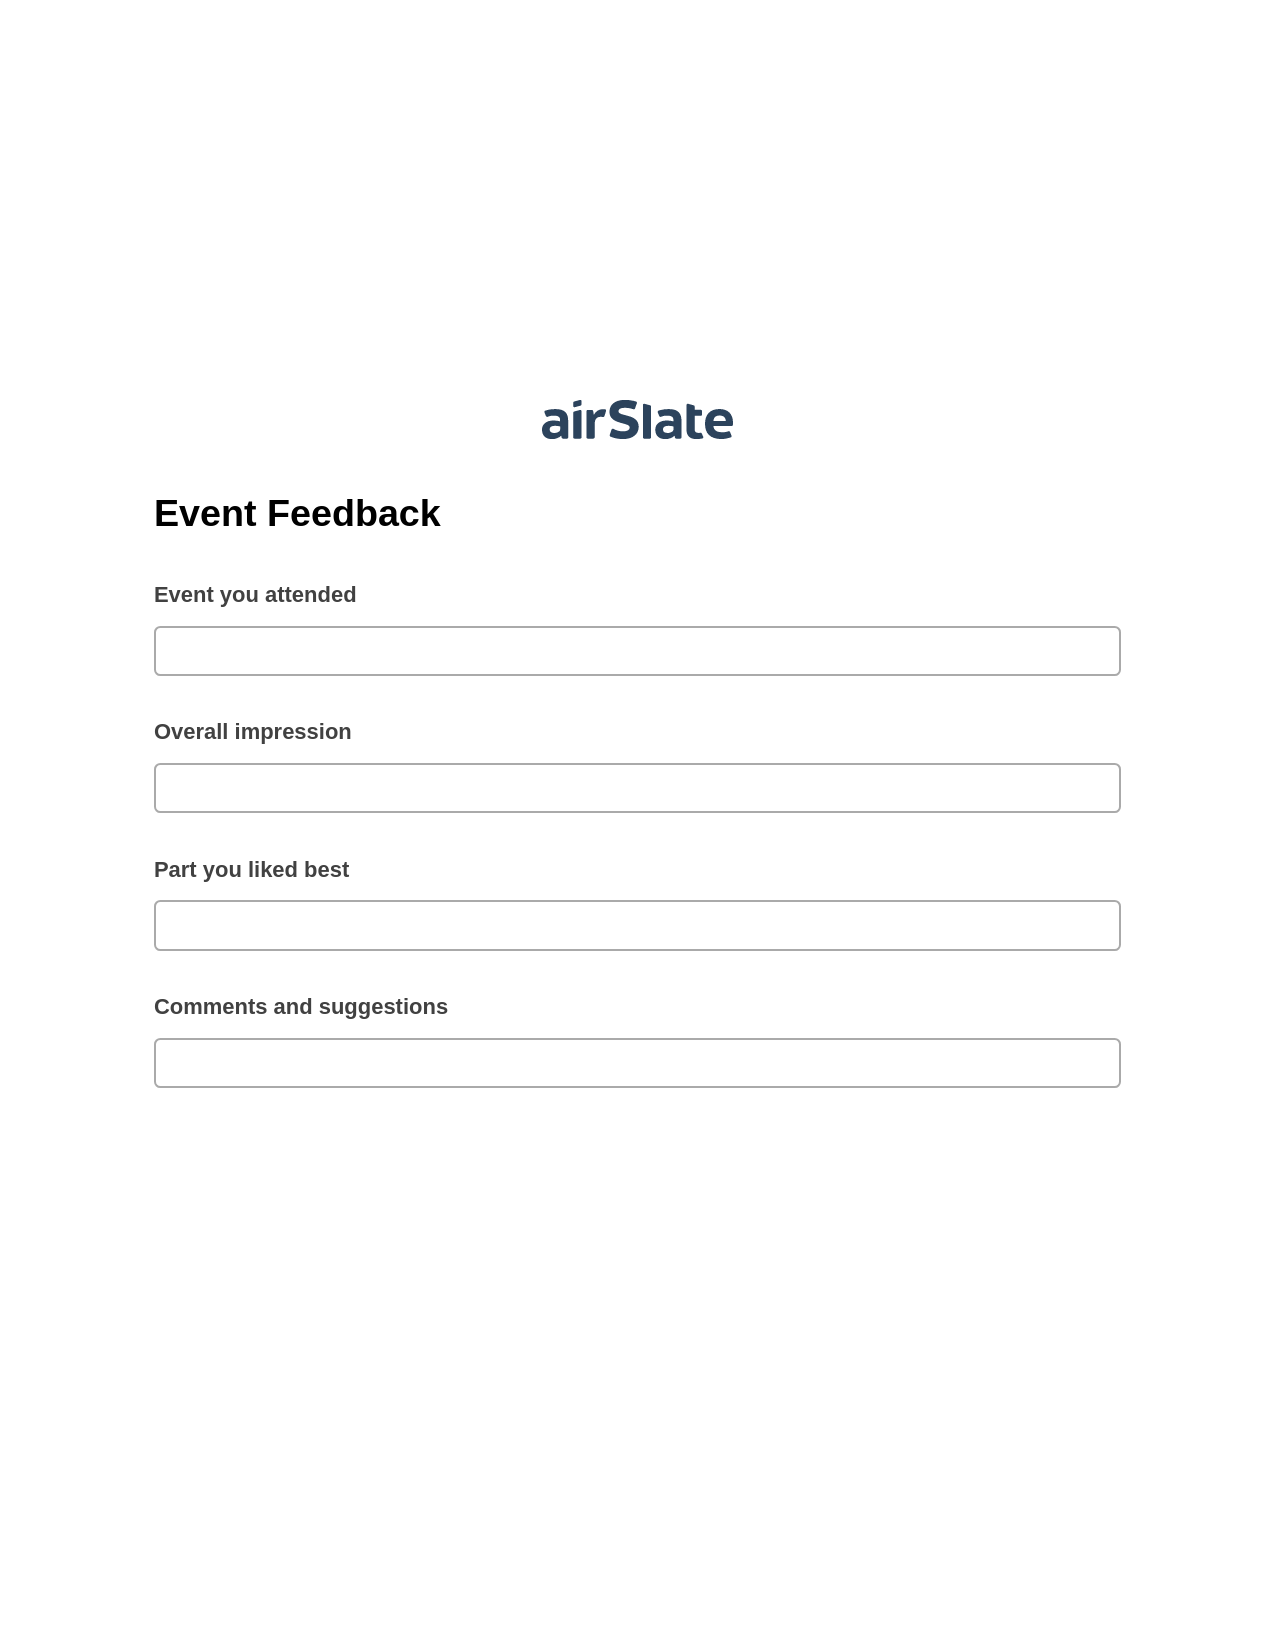 Event Feedback Pre-fill from Salesforce Records with SOQL Bot, Create slate addon, Export to Smartsheet